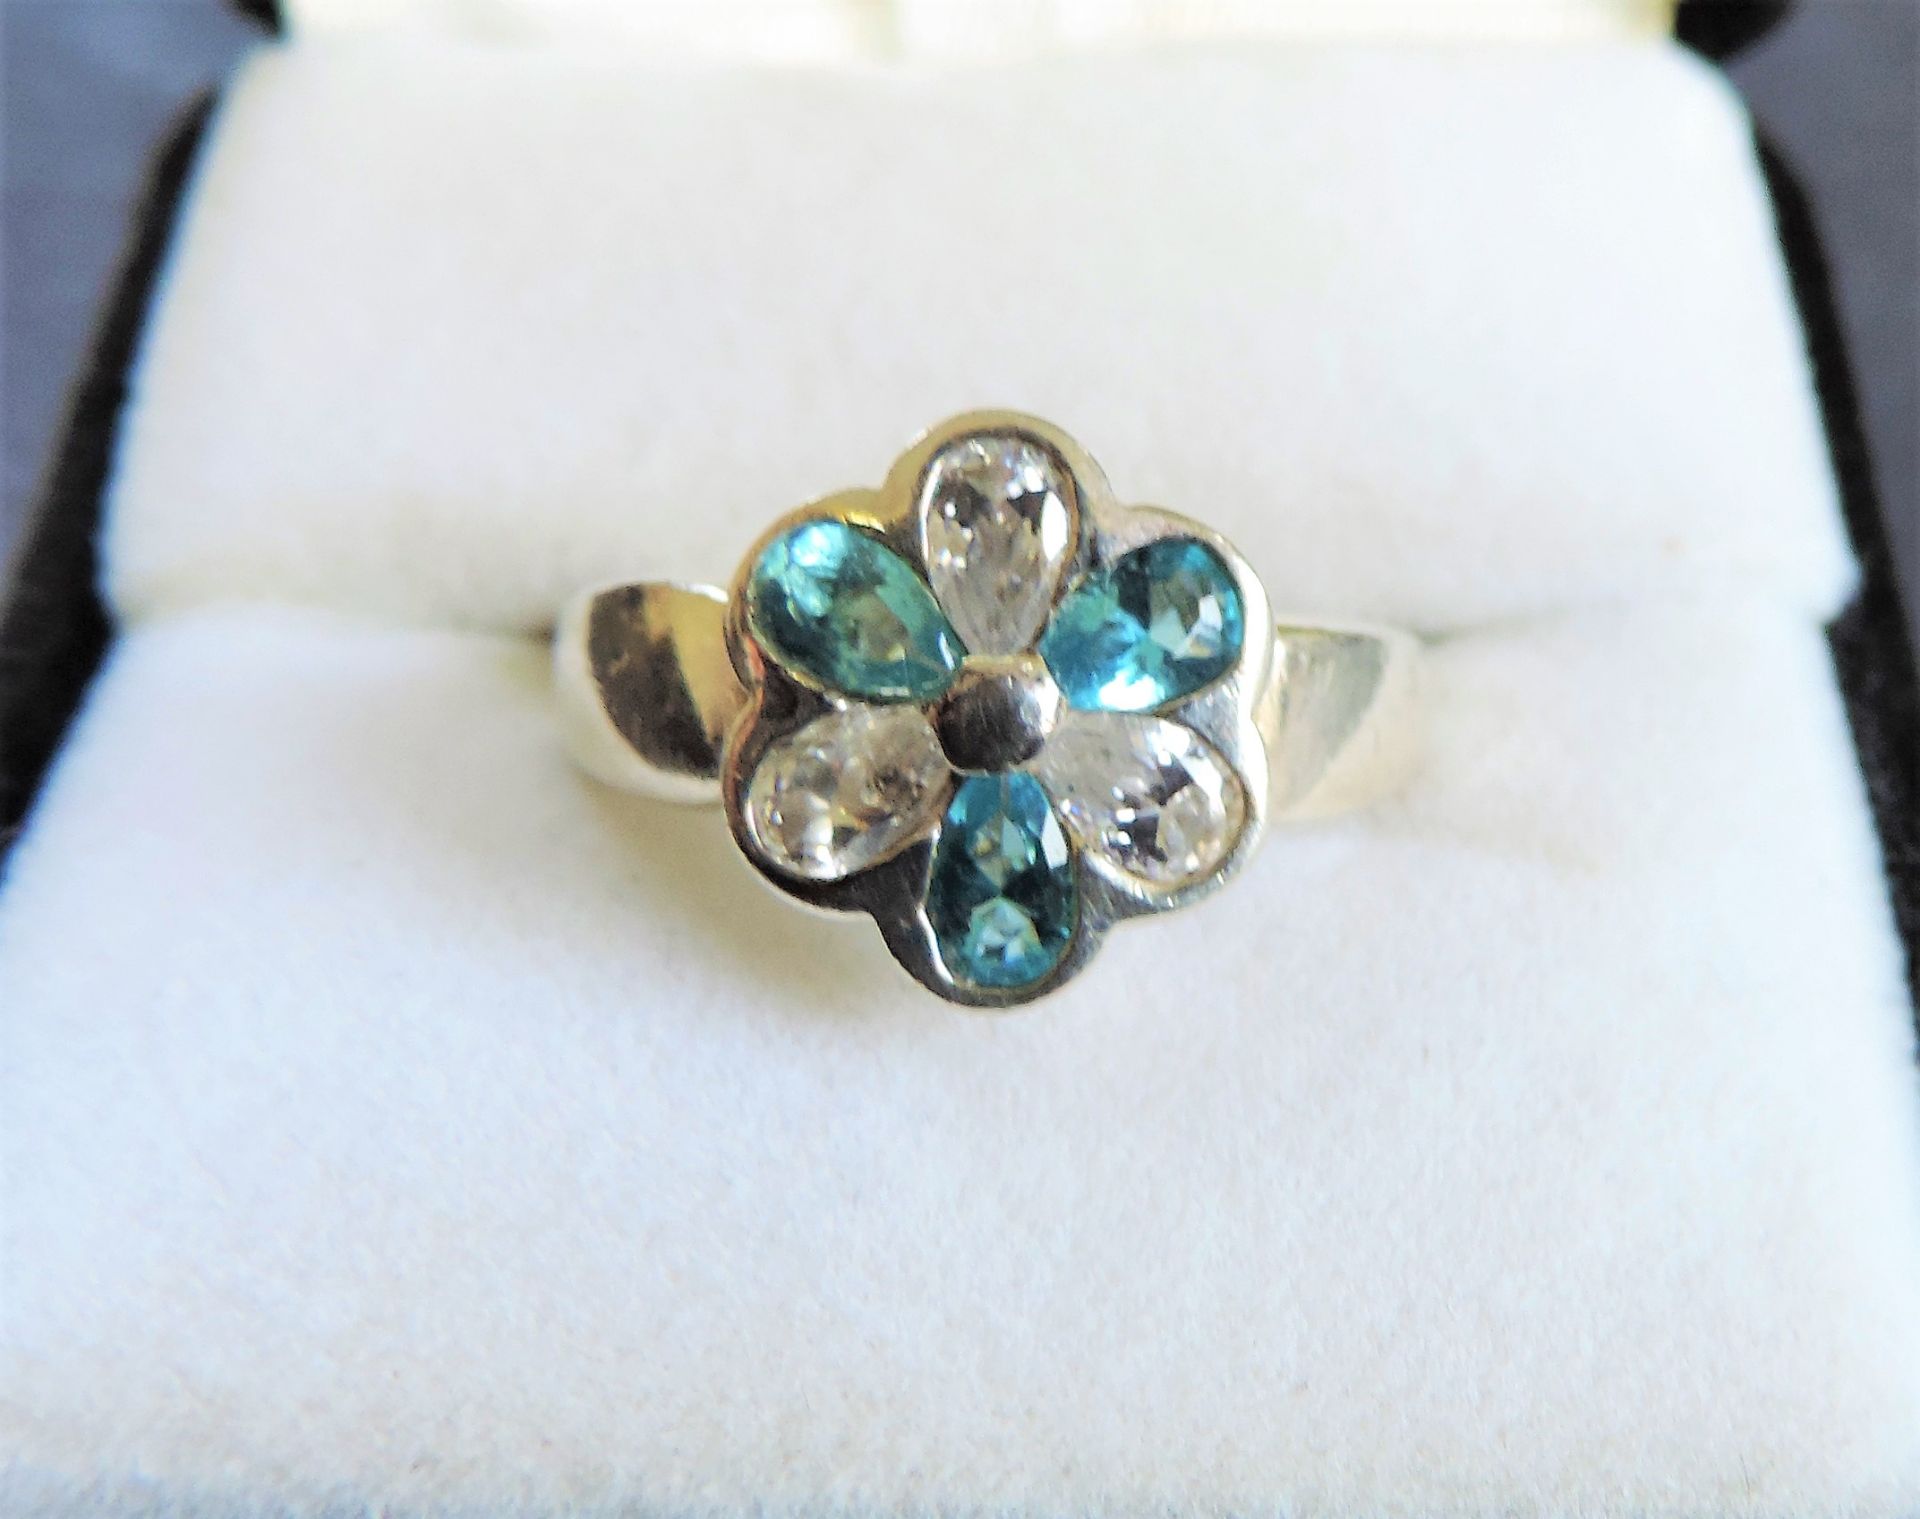 Sterling Silver 1.50ct Blue & White Topaz Ring